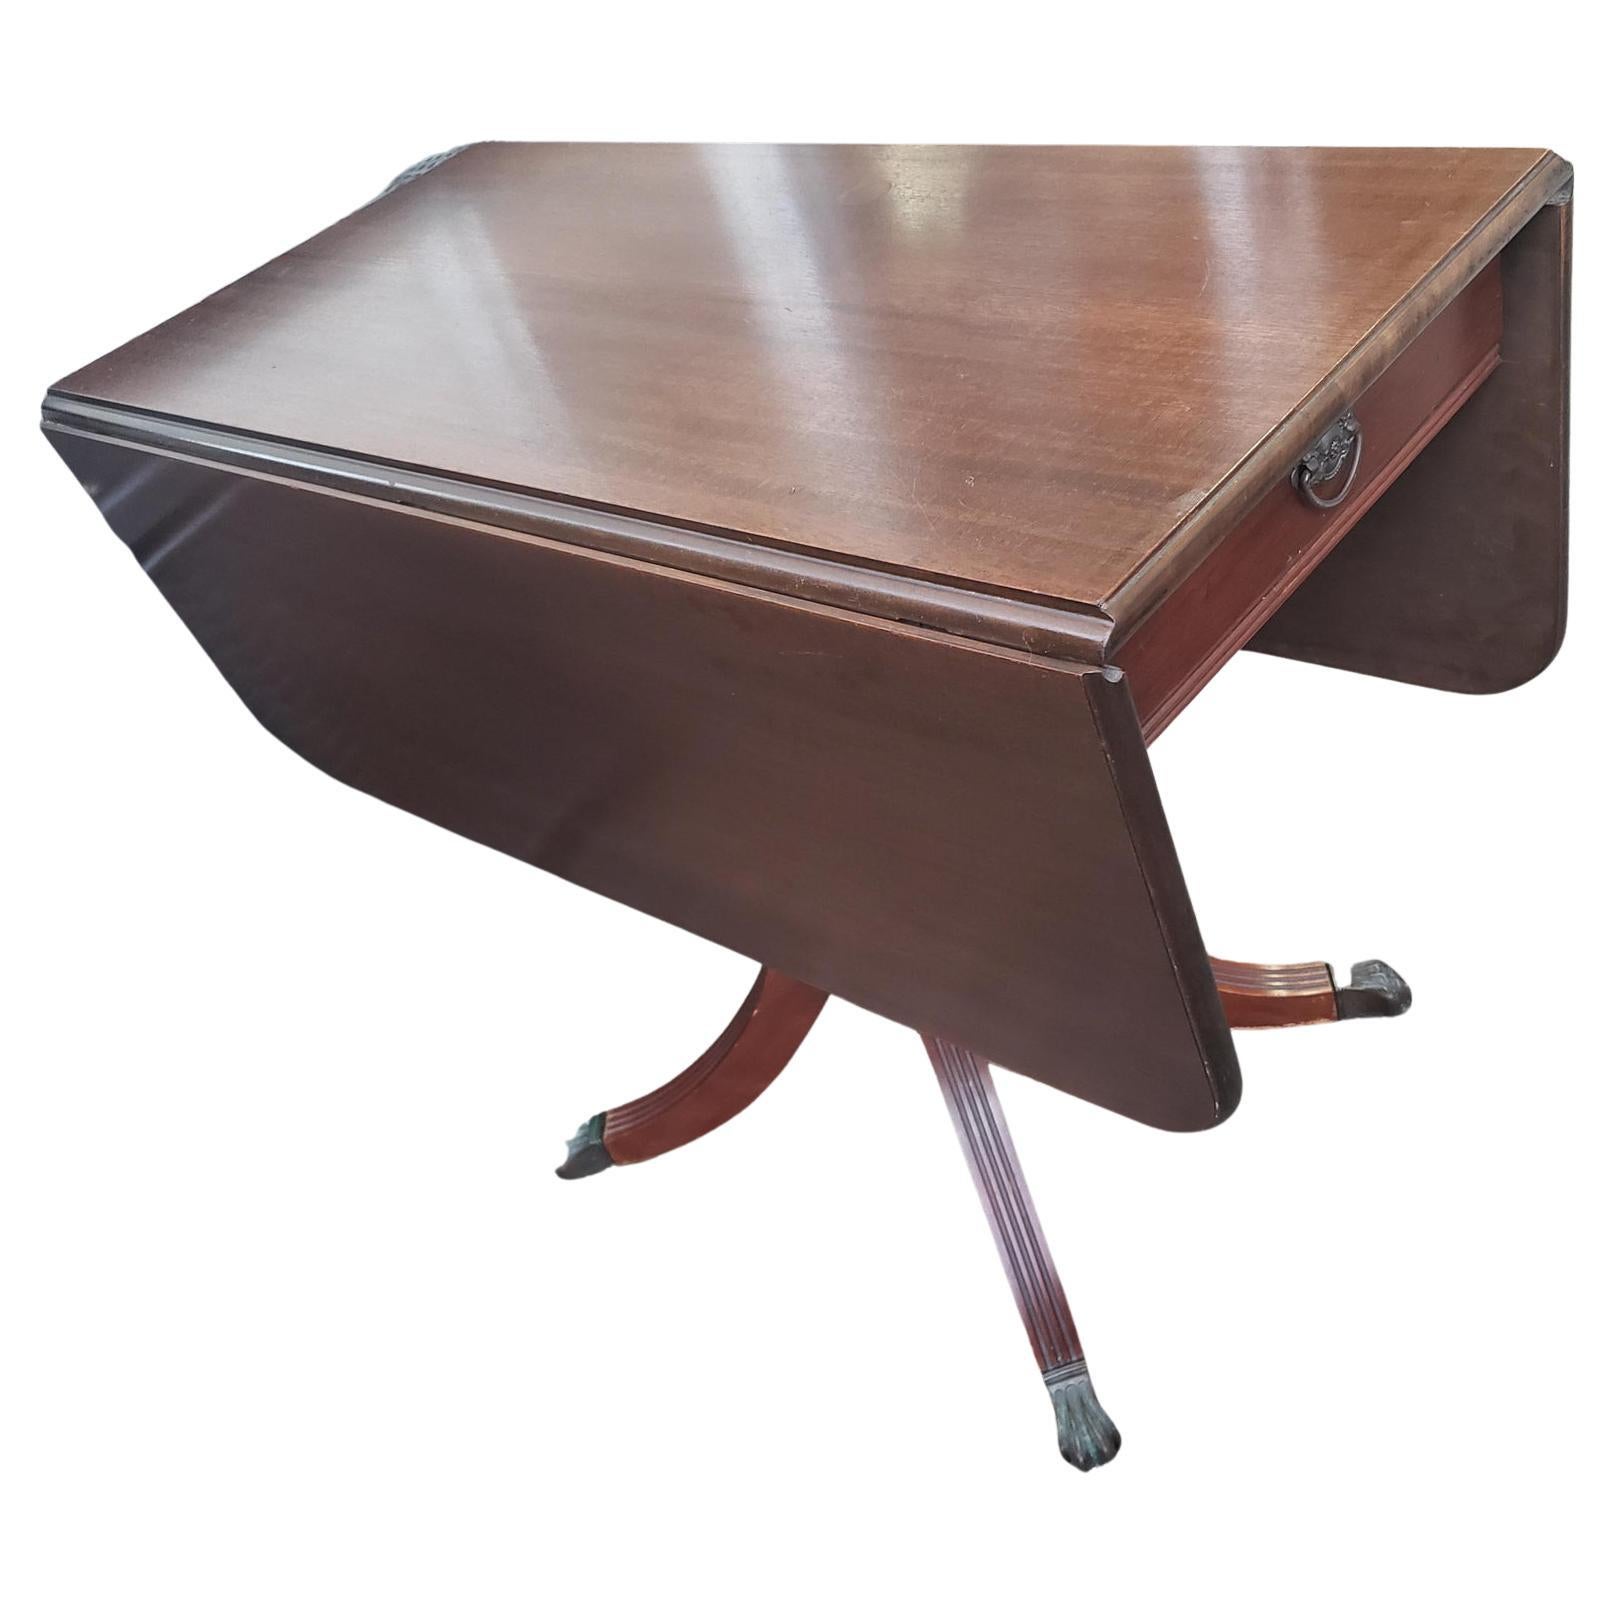 Prestigious Brandt furniture vintage dropleaf pedestal dining table. It features a sleek dovetail side drawer, a hand rubbed and polished semi-gloss finish. The Sheraton style pedestal has 4 fluted legs which terminate with antique brass lion paw